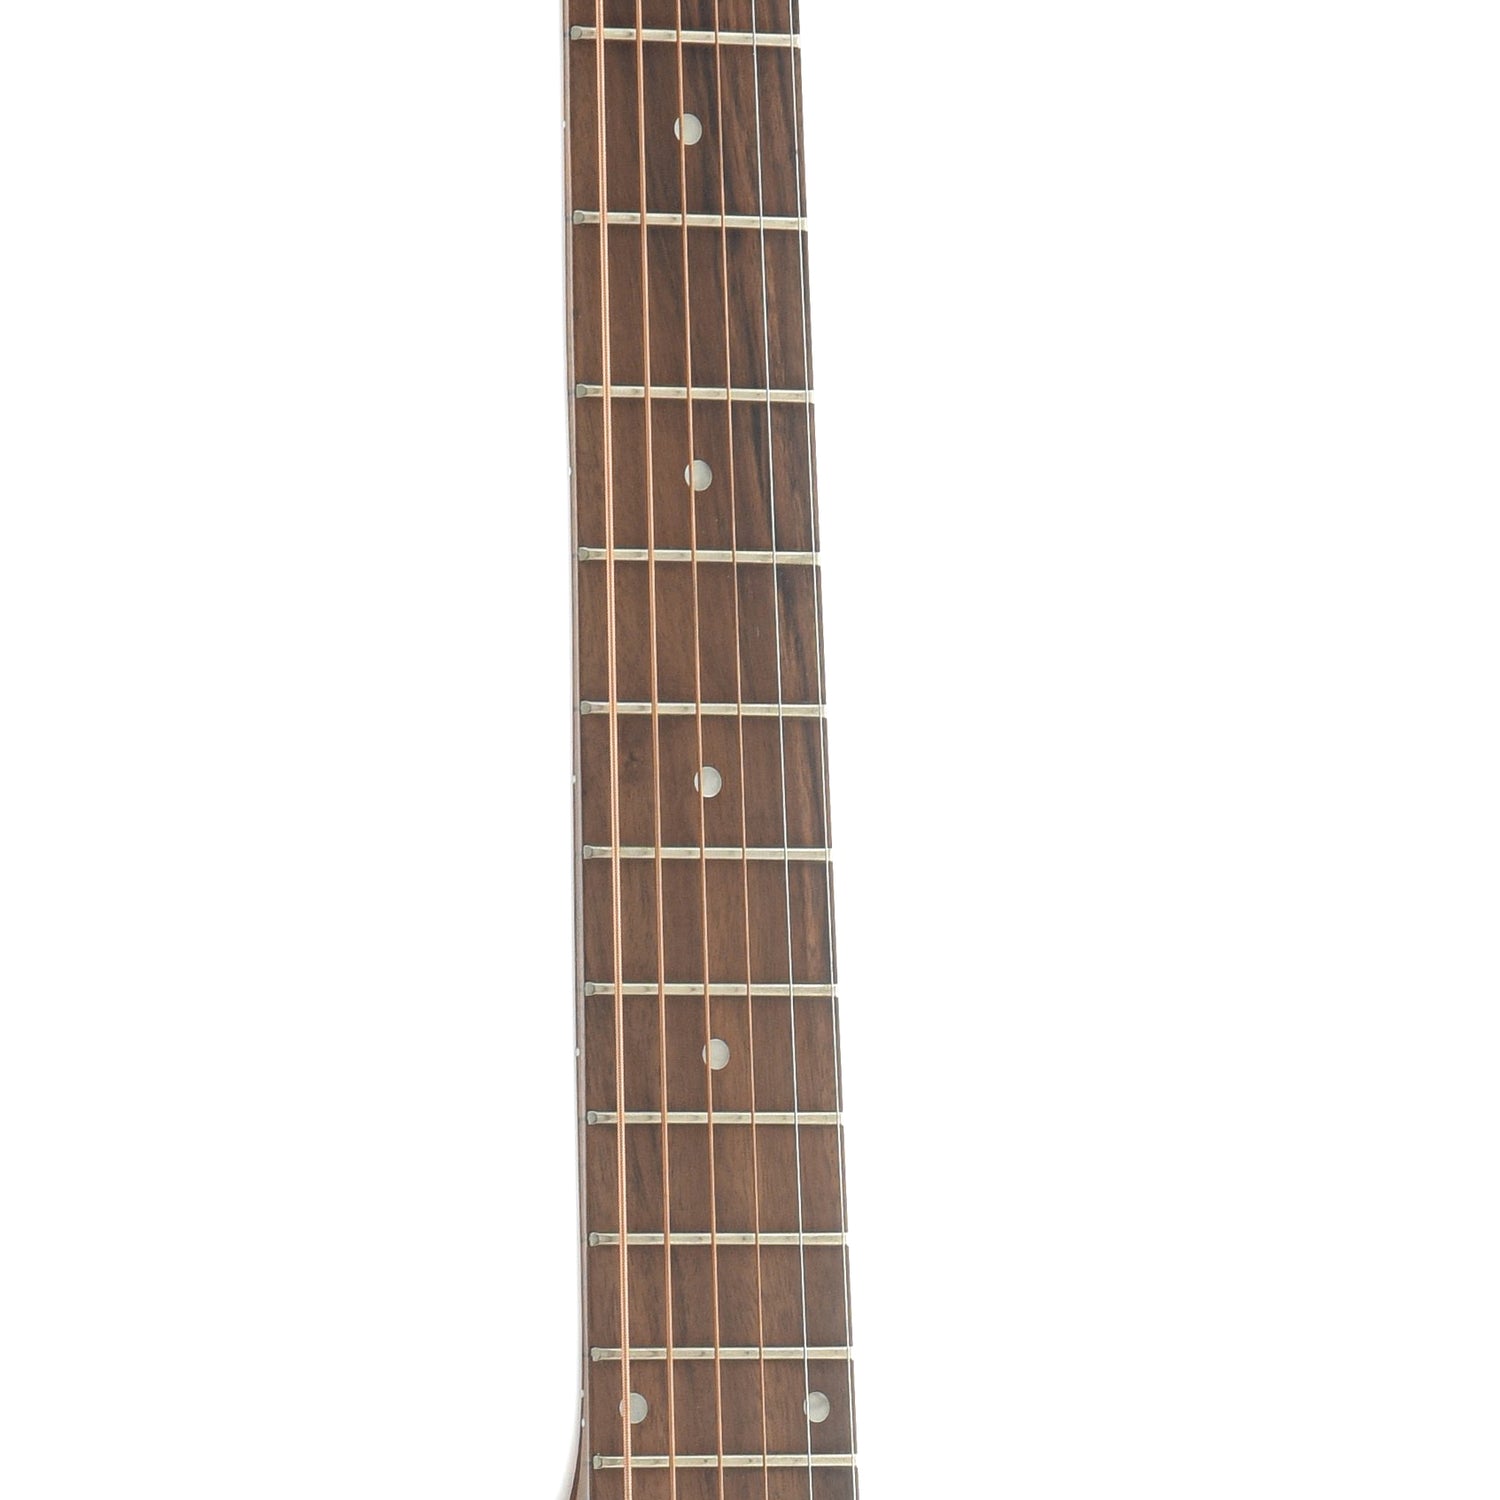 Fretboard of Farida Old Town Series OT-62 VBS Acoustic Guitar